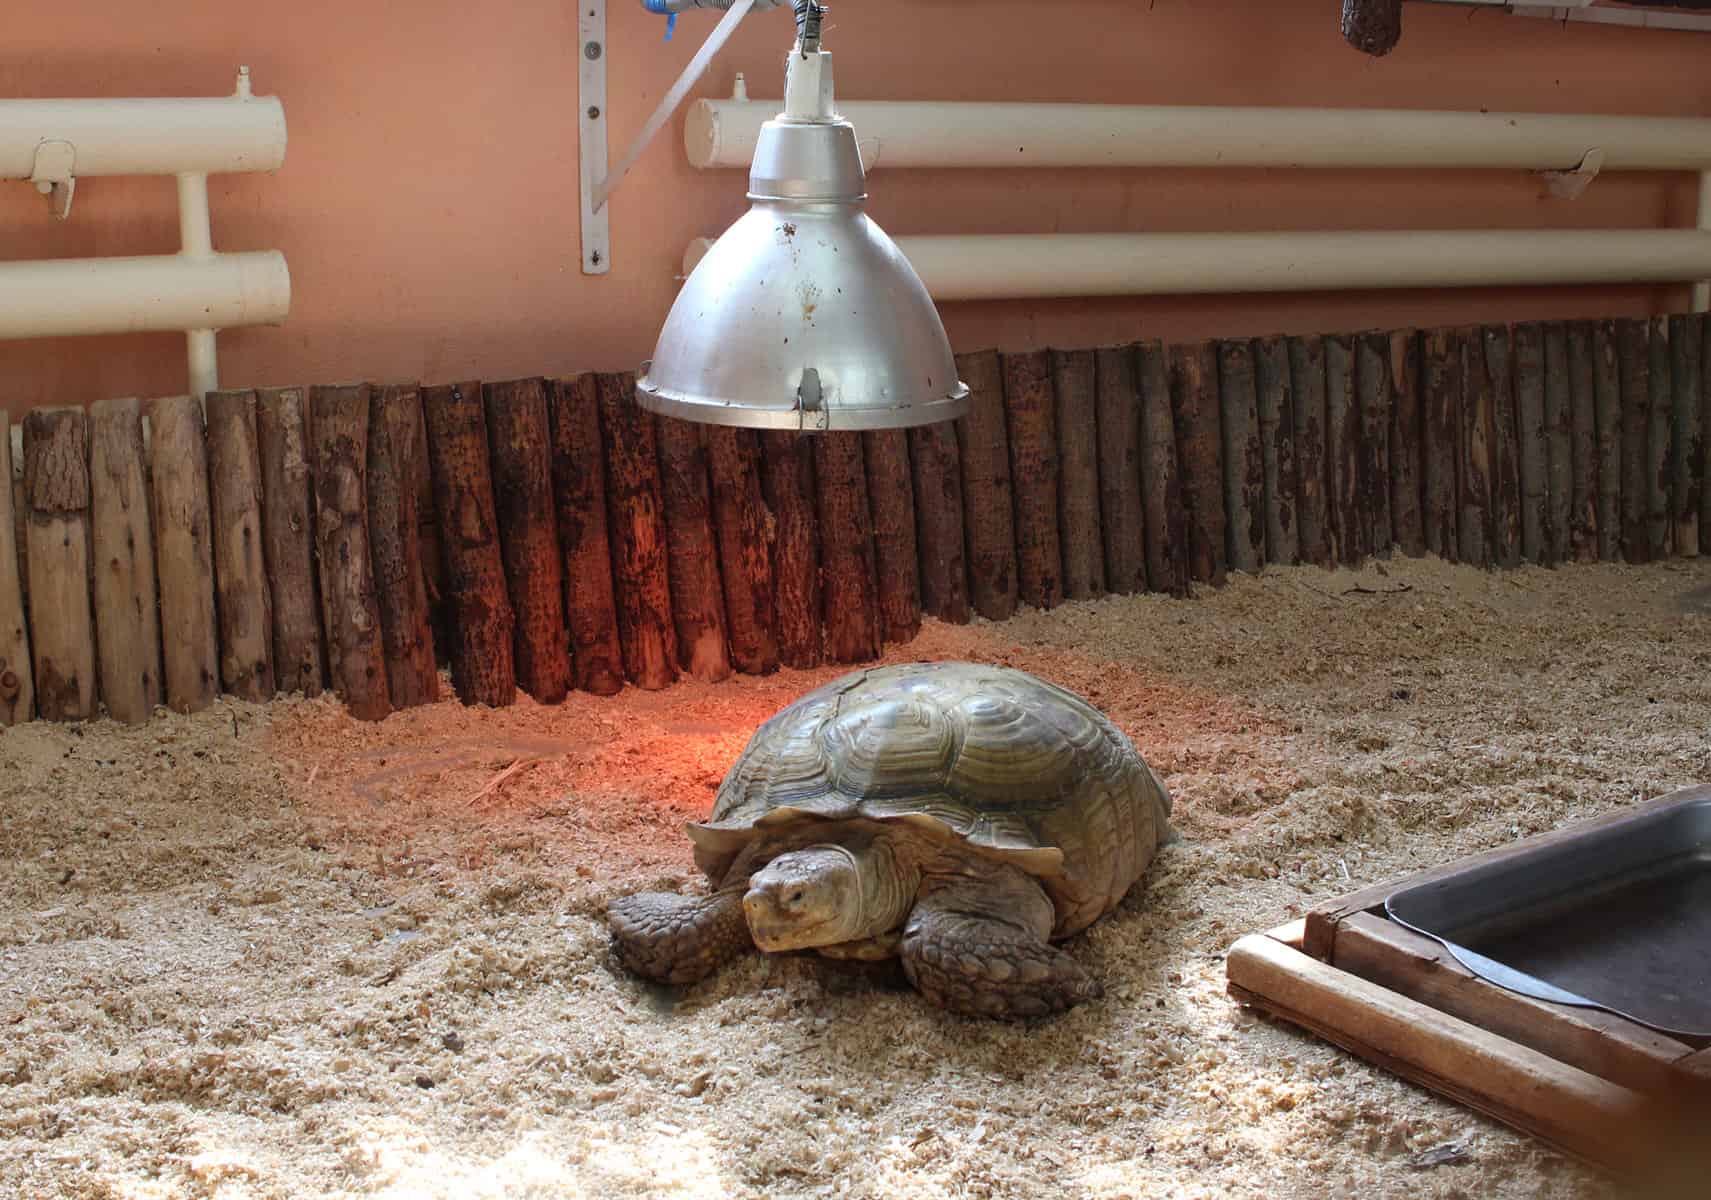 heating lamps for turtles